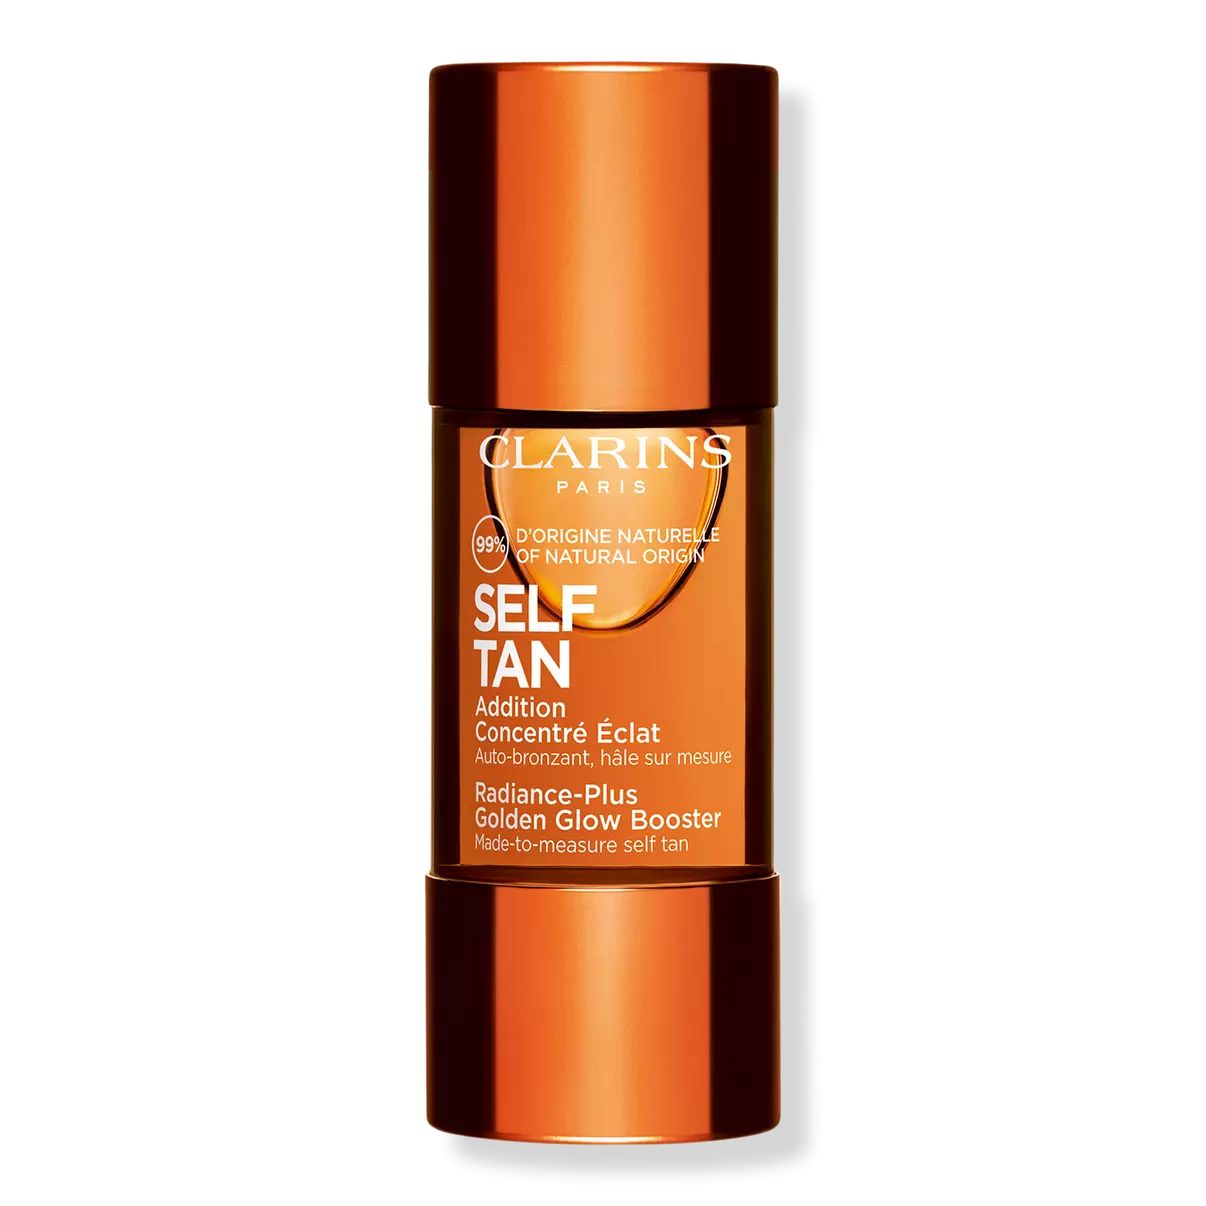 Radiance-Plus Golden Glow Booster for Face | Ulta